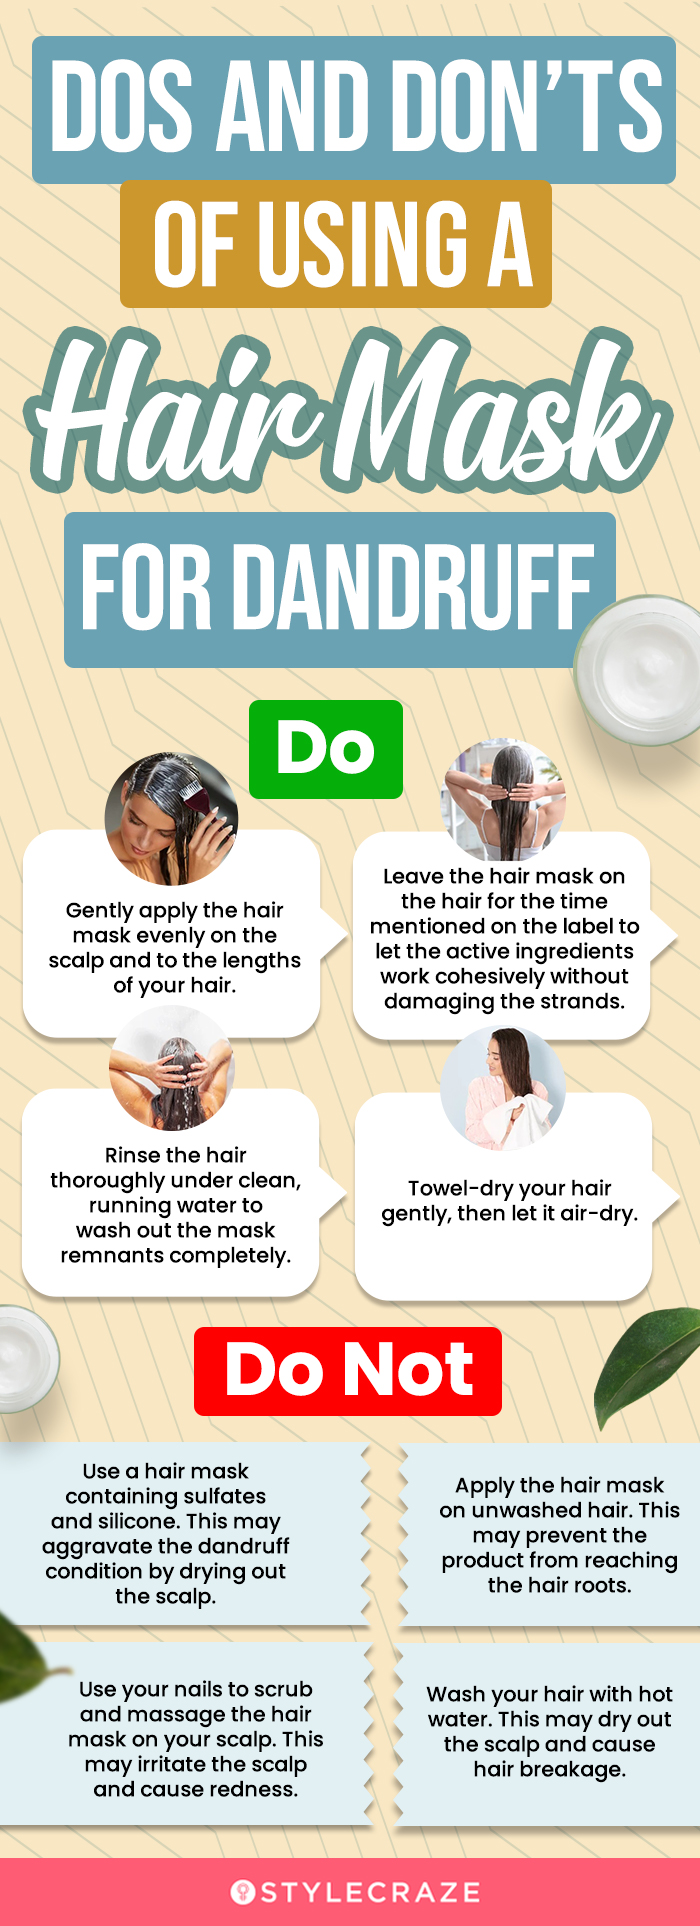 Dos And Don’ts Of Using A Hair Mask For Dandruff (infographic)